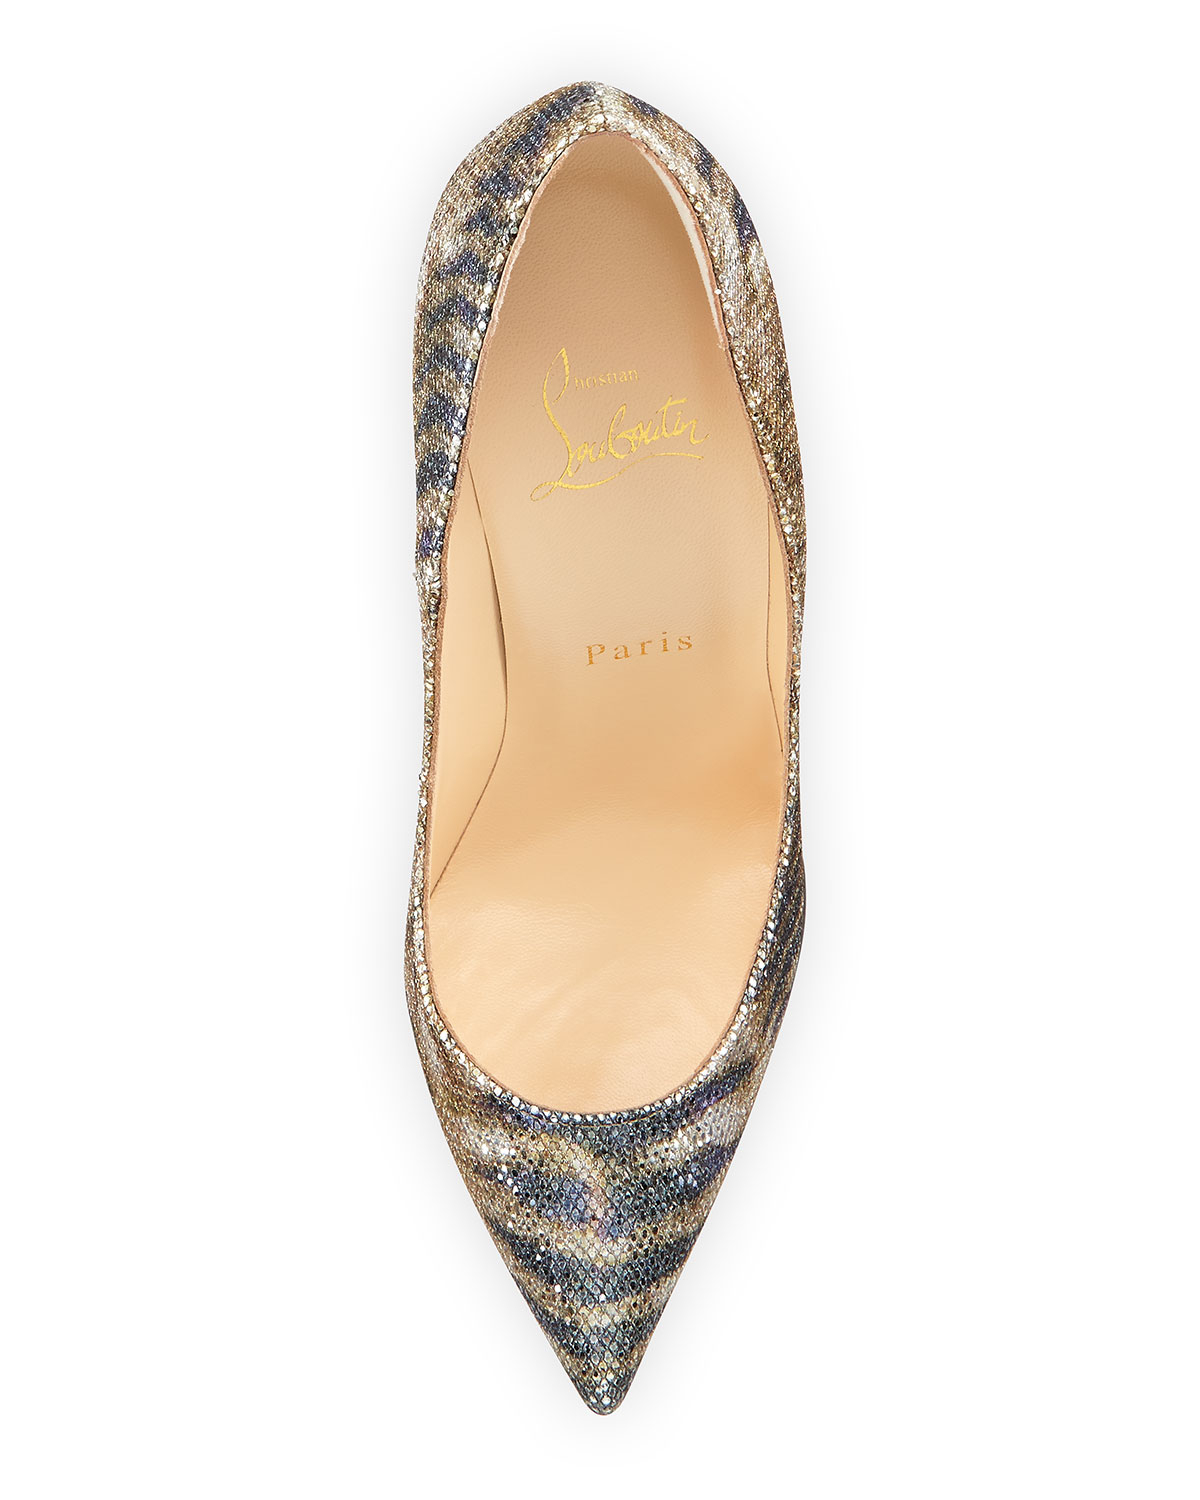 christian louboutin the pigalle 100 polished leather pumps ...  